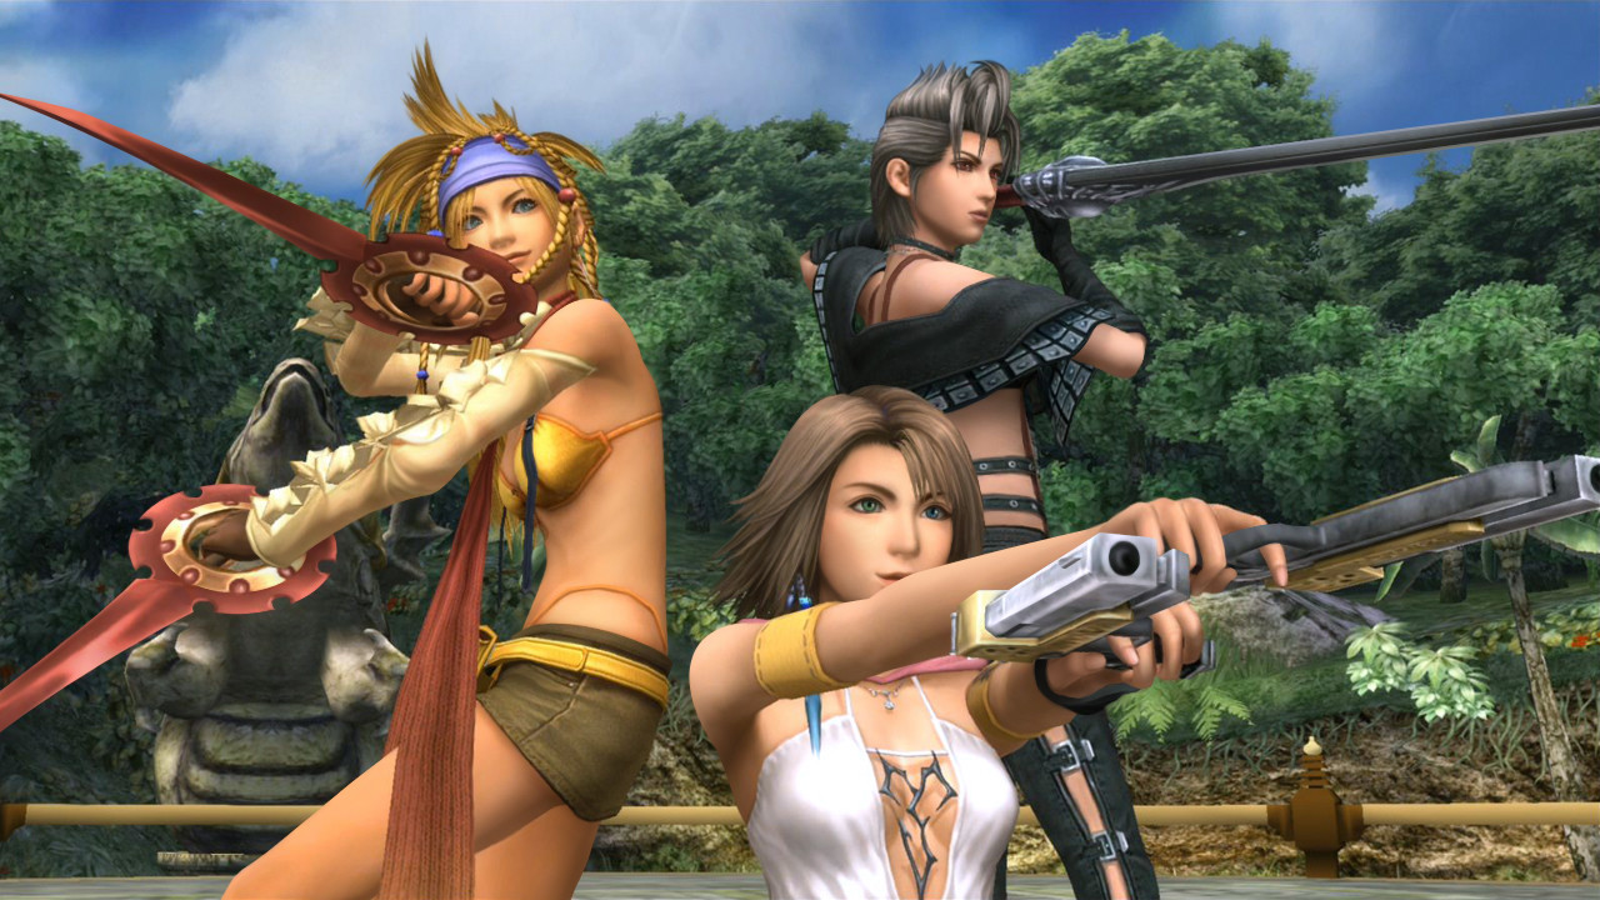 Final Fantasy X/X-2 join Xbox Game Pass for PC this month